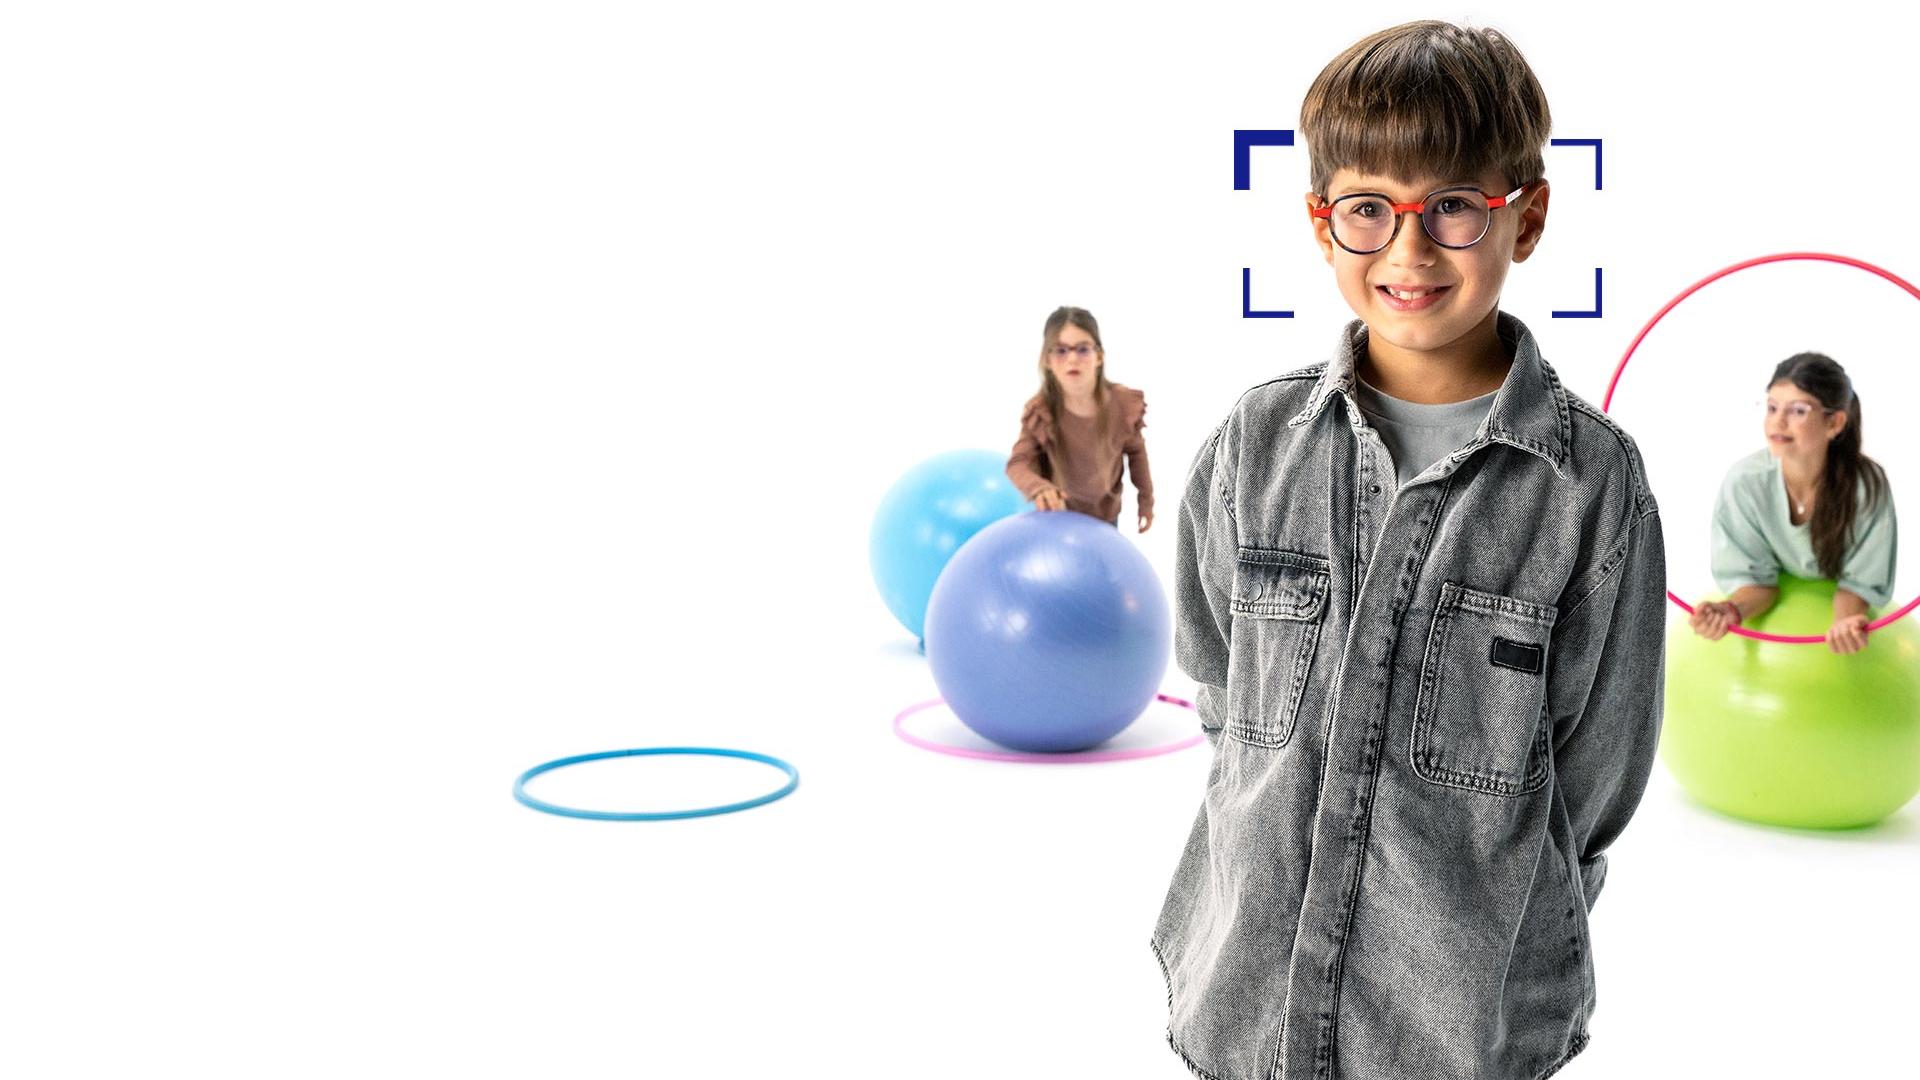 Brown-haired boy with round glasses wearing ZEISS MyoCare lenses stands in the foreground and smiles at the camera. In the background are two girls wearing ZEISS MyoCare lenses playing with hoops and gymnastic balls.